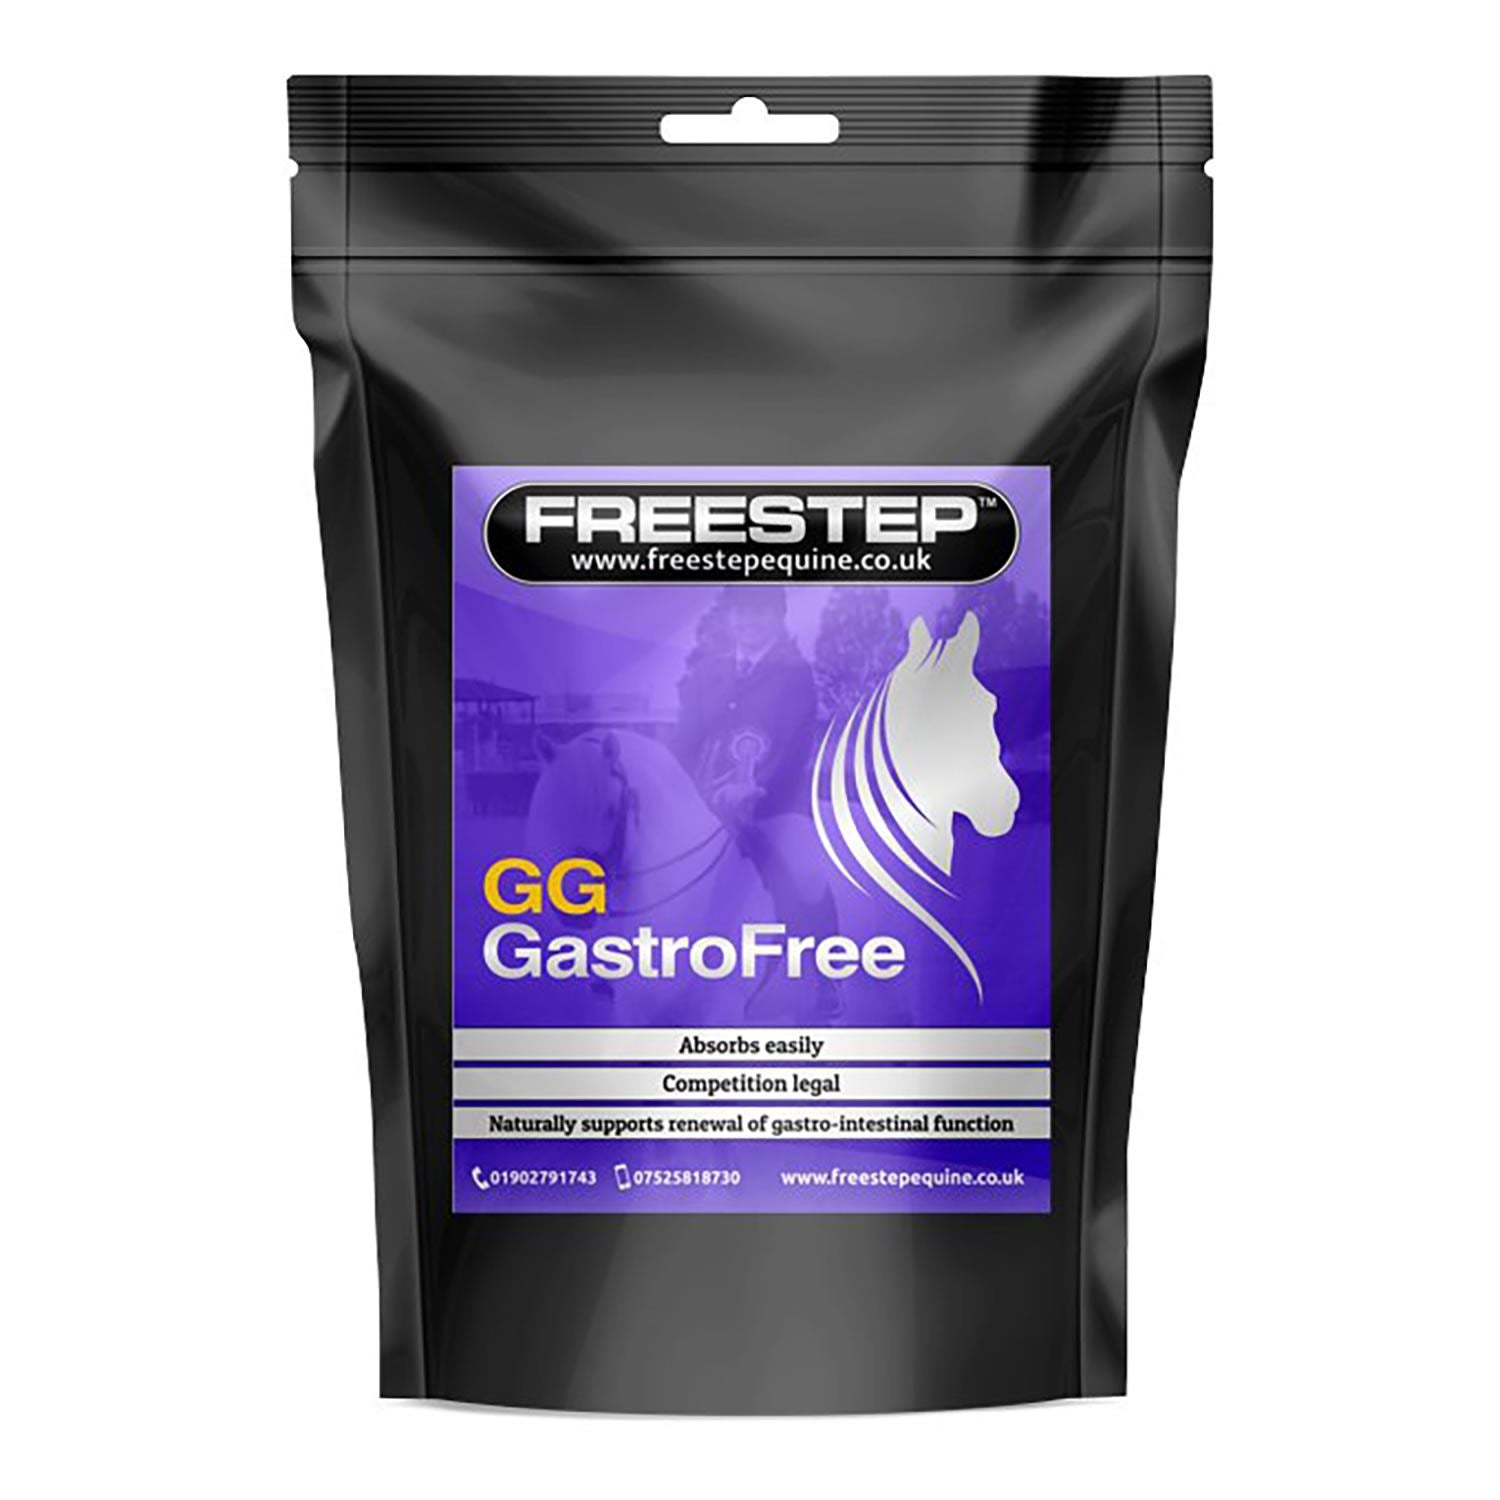 Freestep Gg Gastrofree - Just Horse Riders